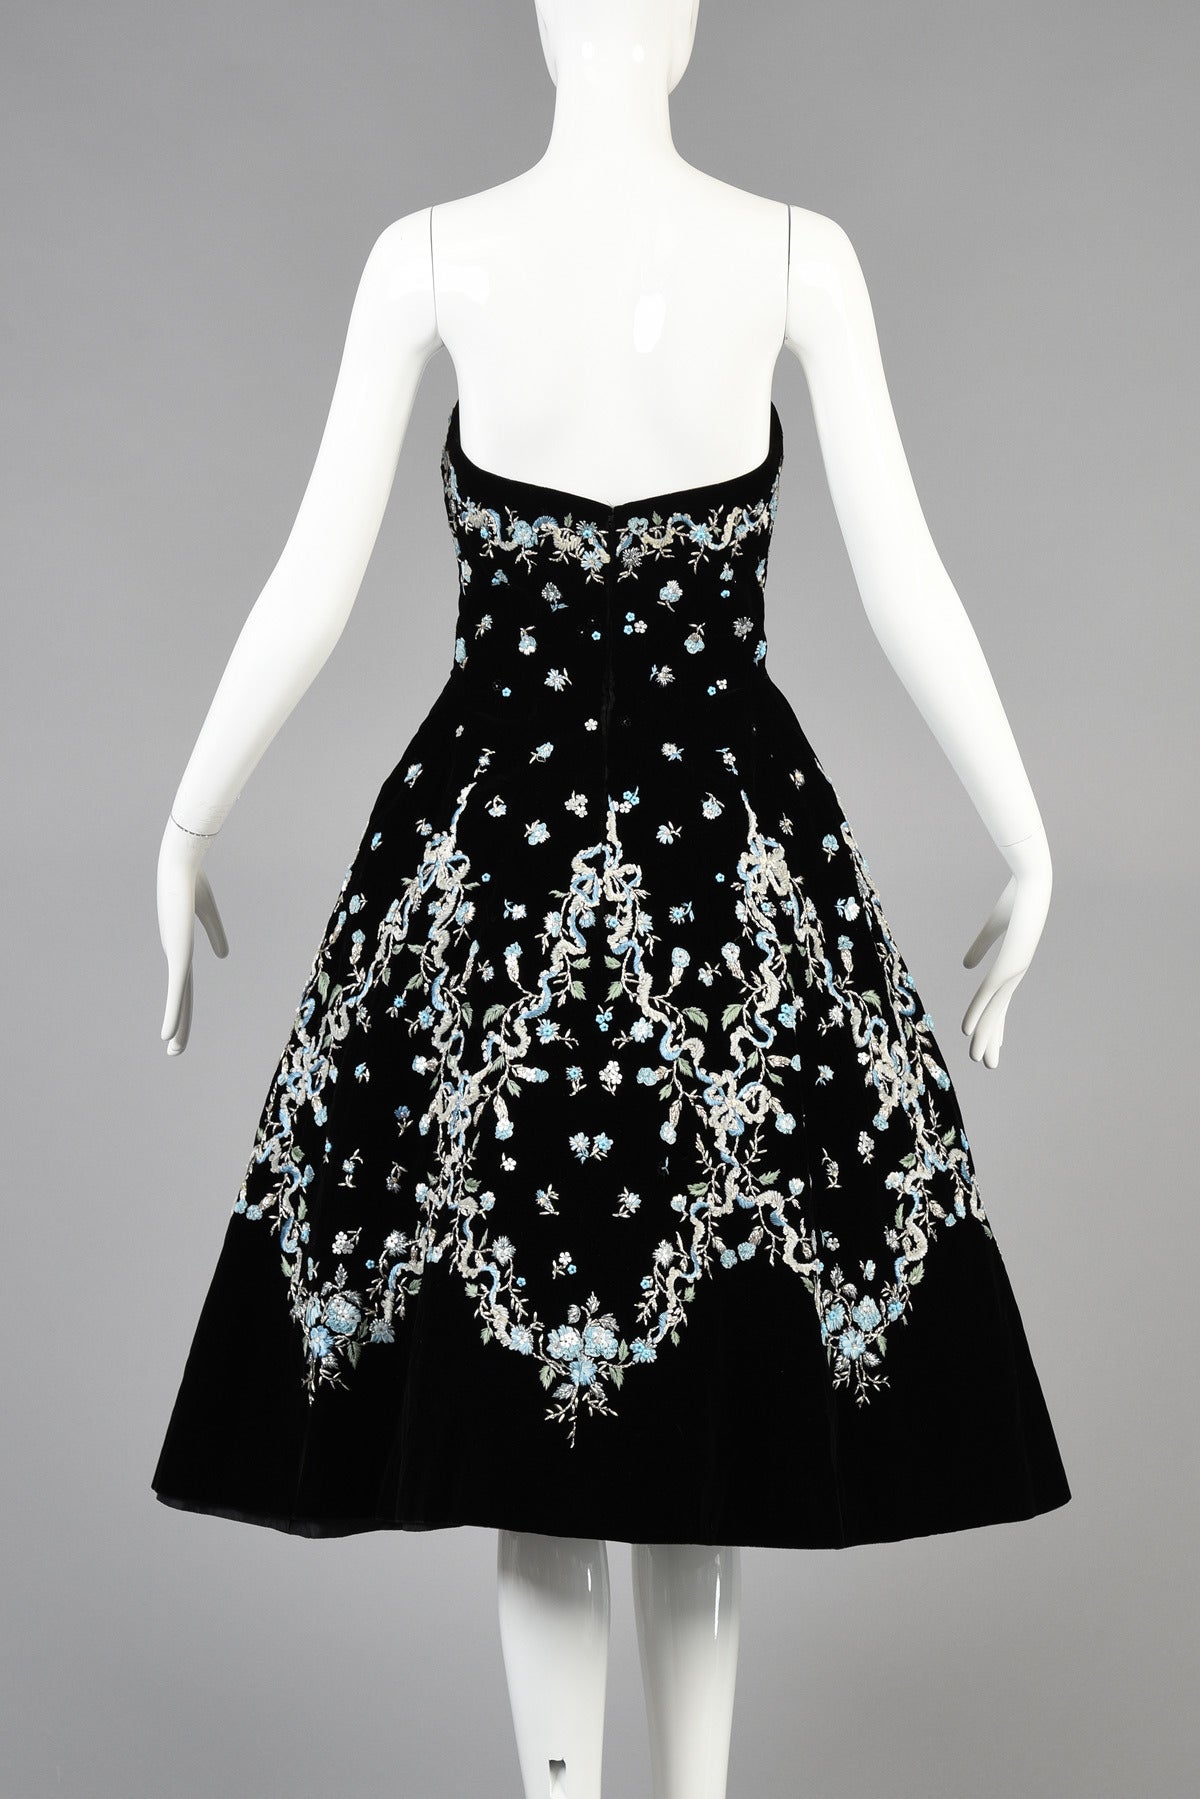 1957 Pierre Balmain Haute Couture Cocktail Dress with Lesage Embroidery For Sale 1